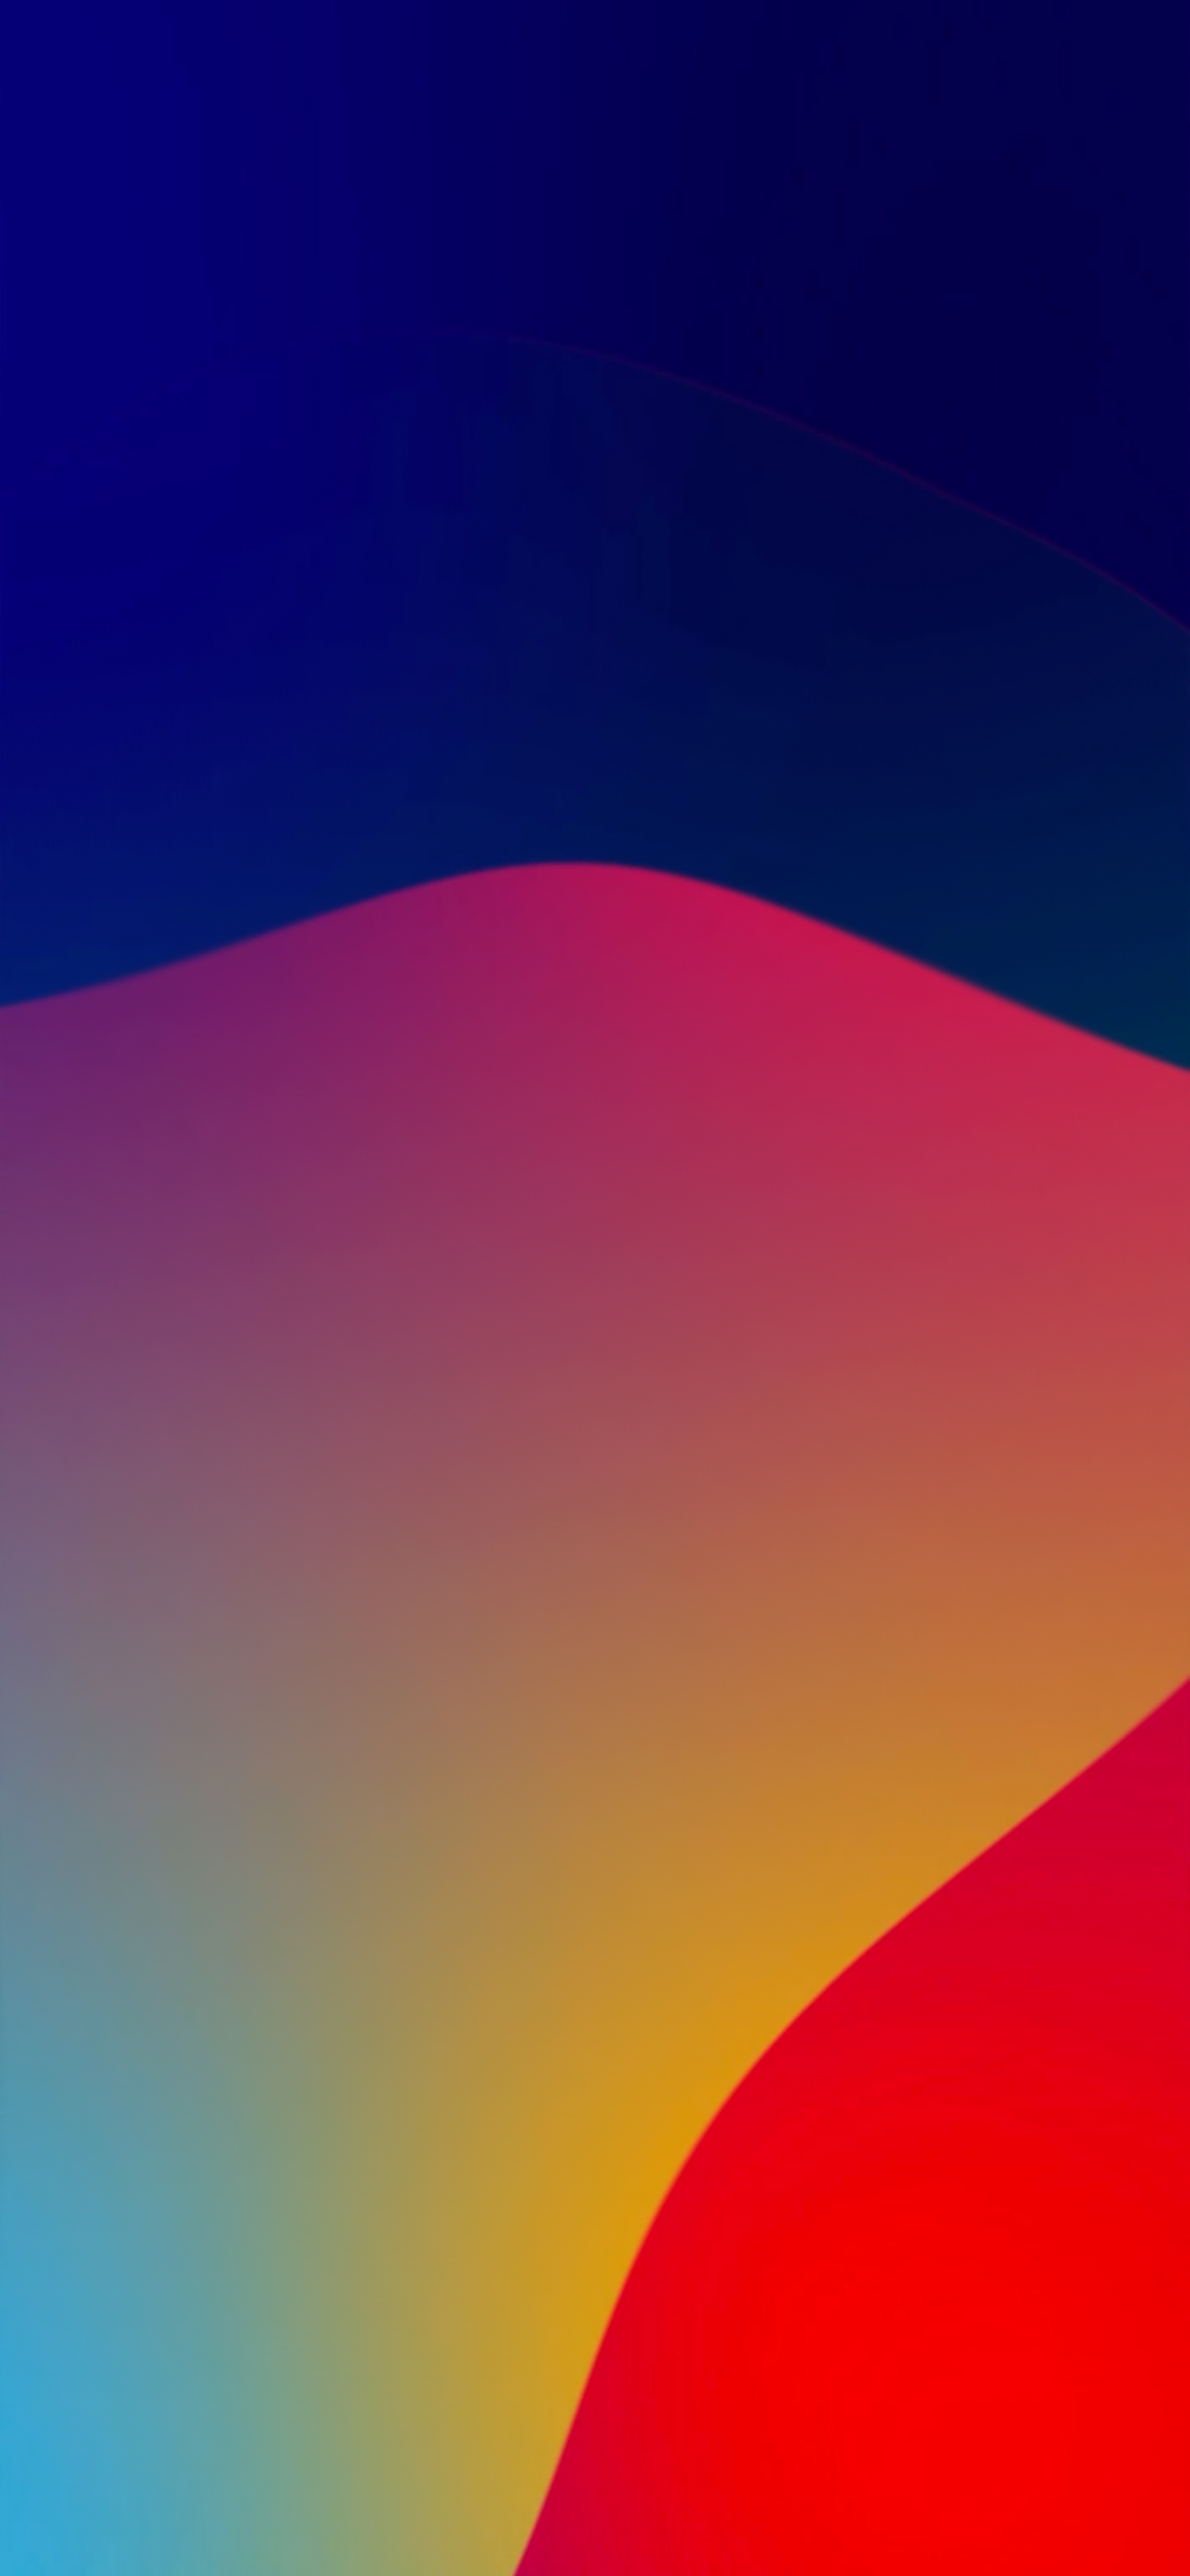 Awesome Gradients - Wallpapers Central